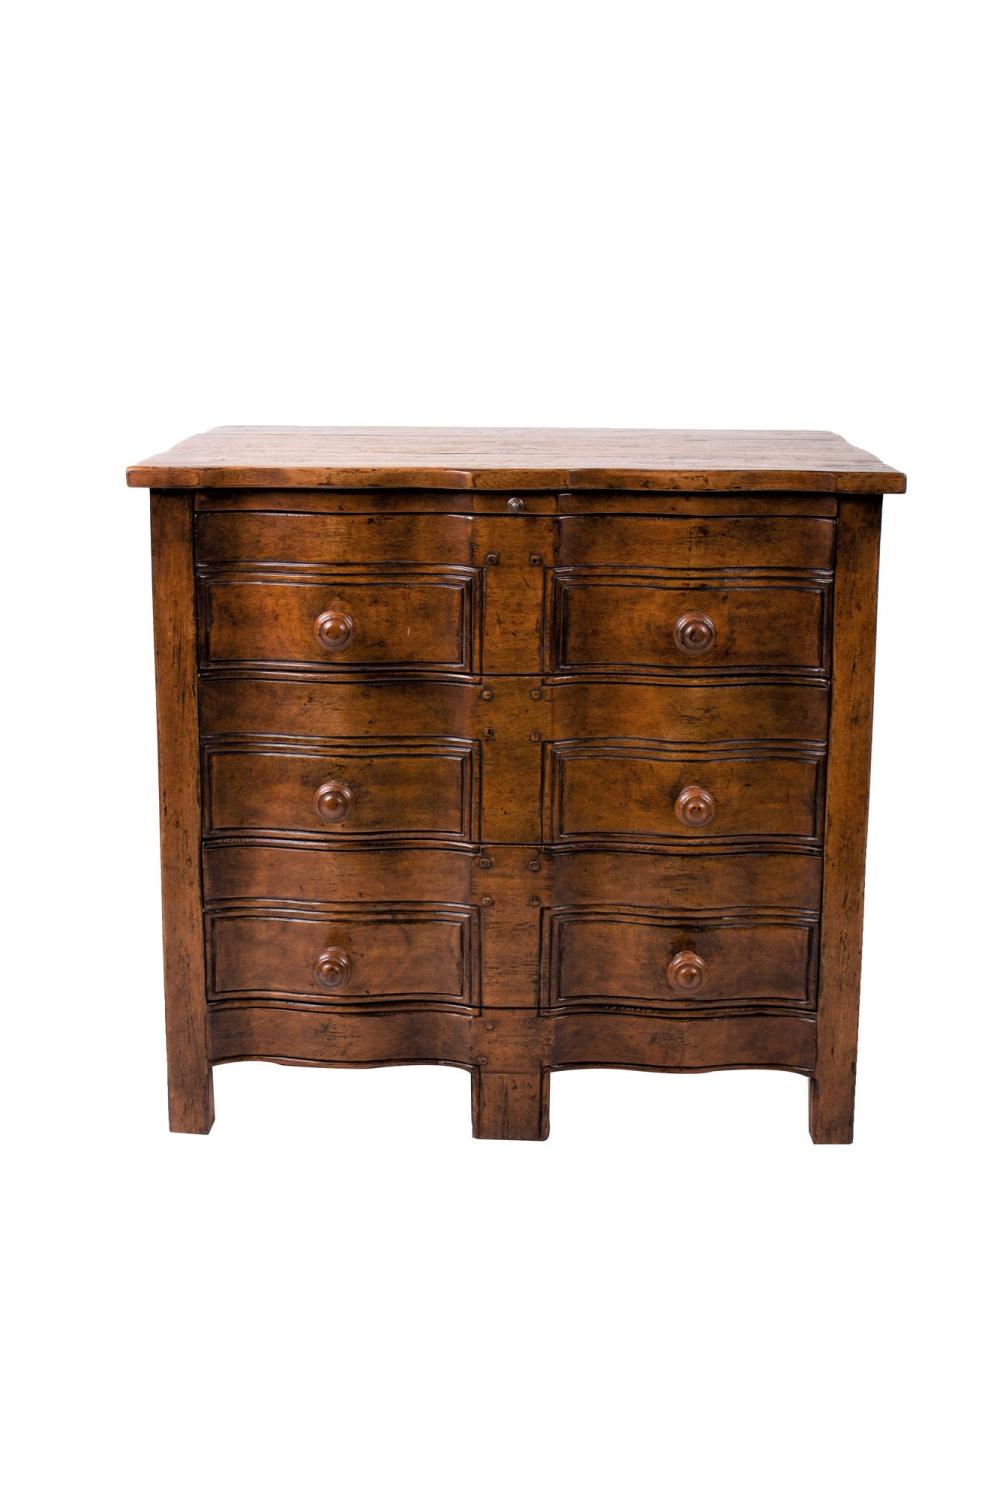 GREGORIUS PINEO ASPEN BEDSIDE CHESTwith 33624b